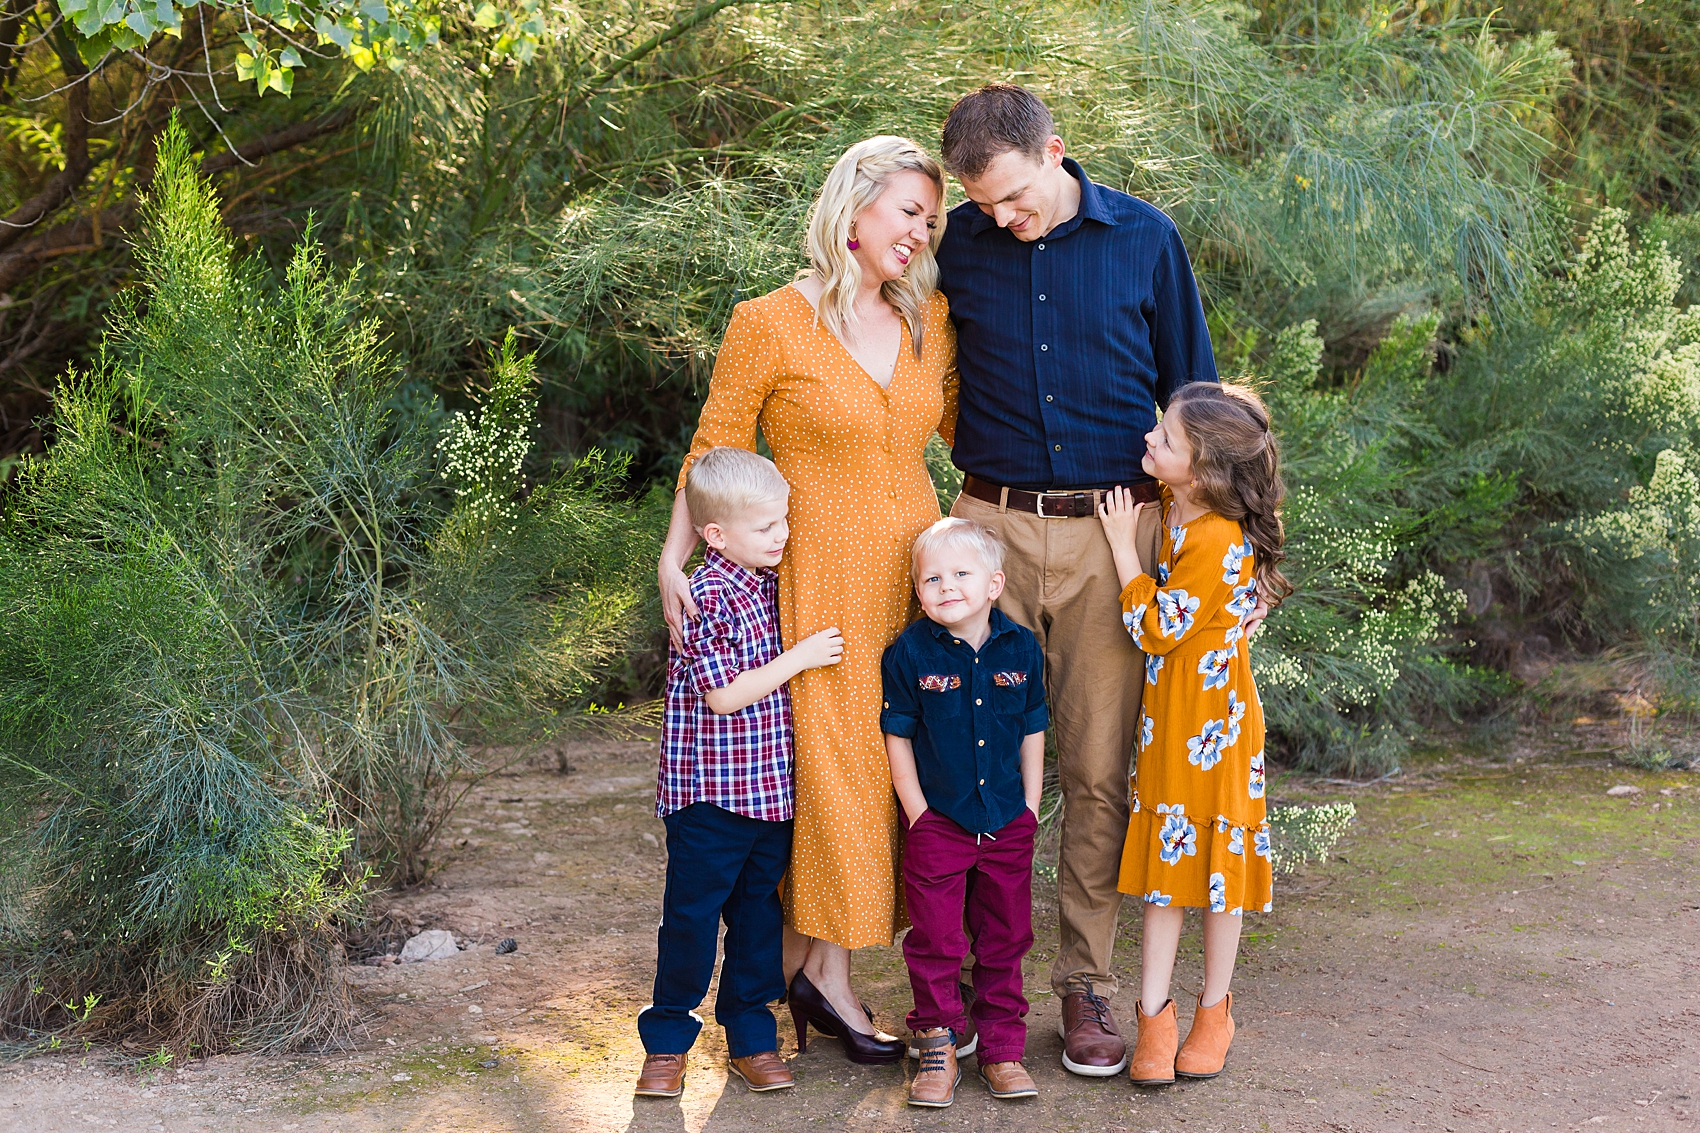 Leah Hope Photography | Scottsdale Phoenix Arizona | Nature Greenery | Family Pictures | What to Wear | Family Poses | Children | Fall